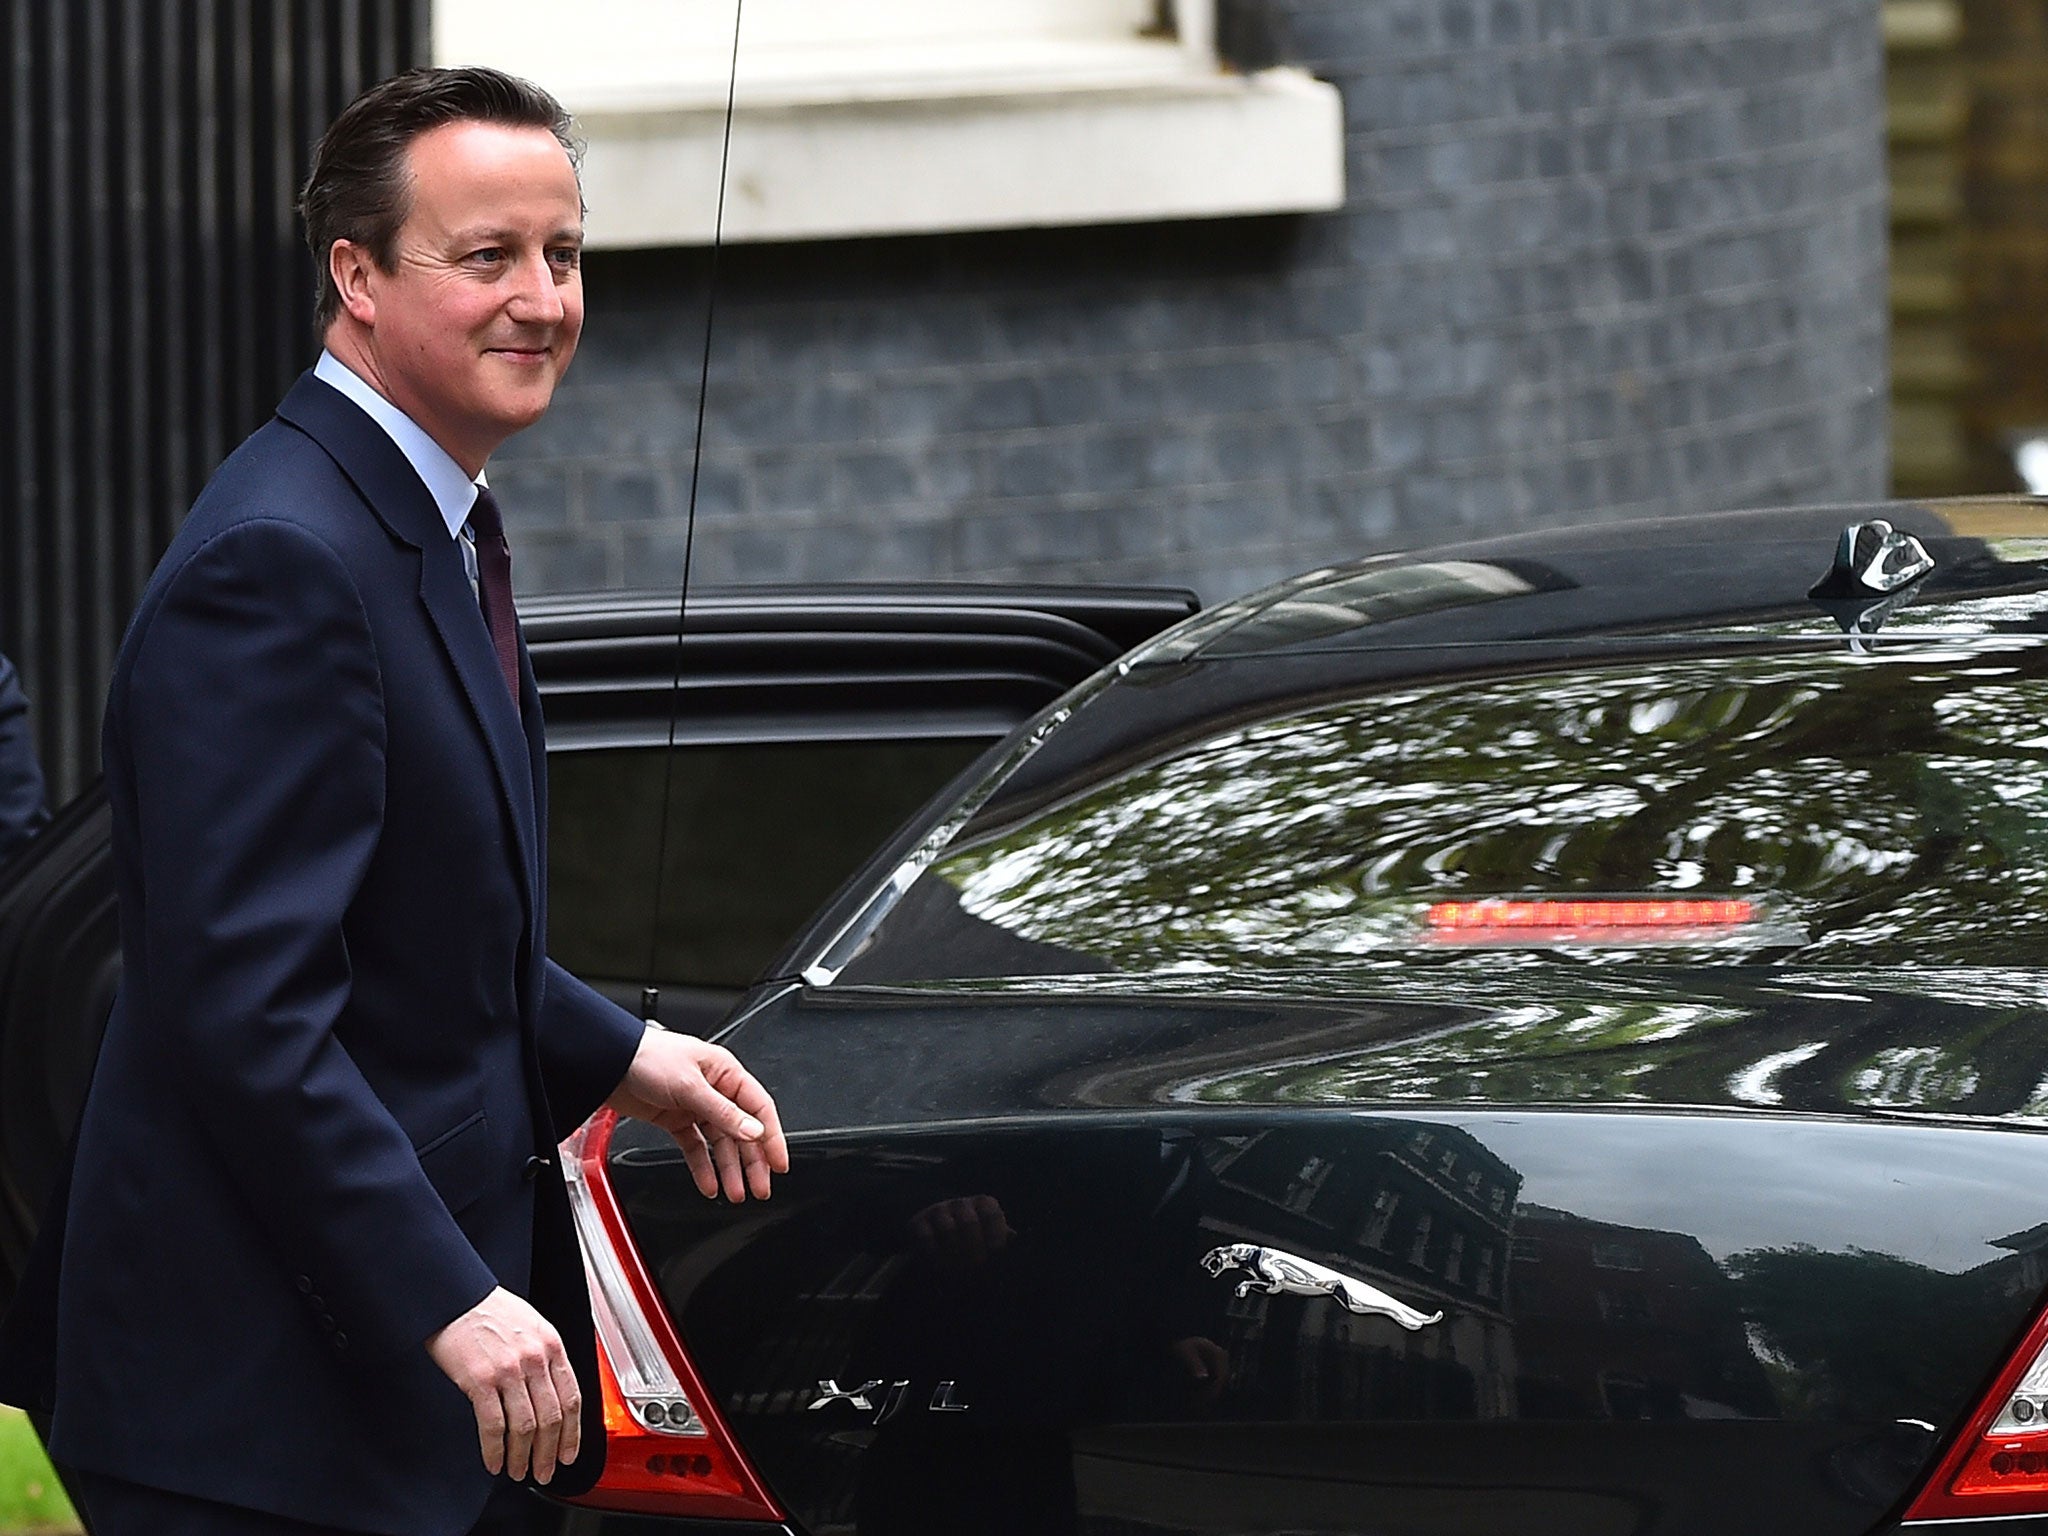 After Cameron's victory the top four Tory jobs in Government will all remain unchanged